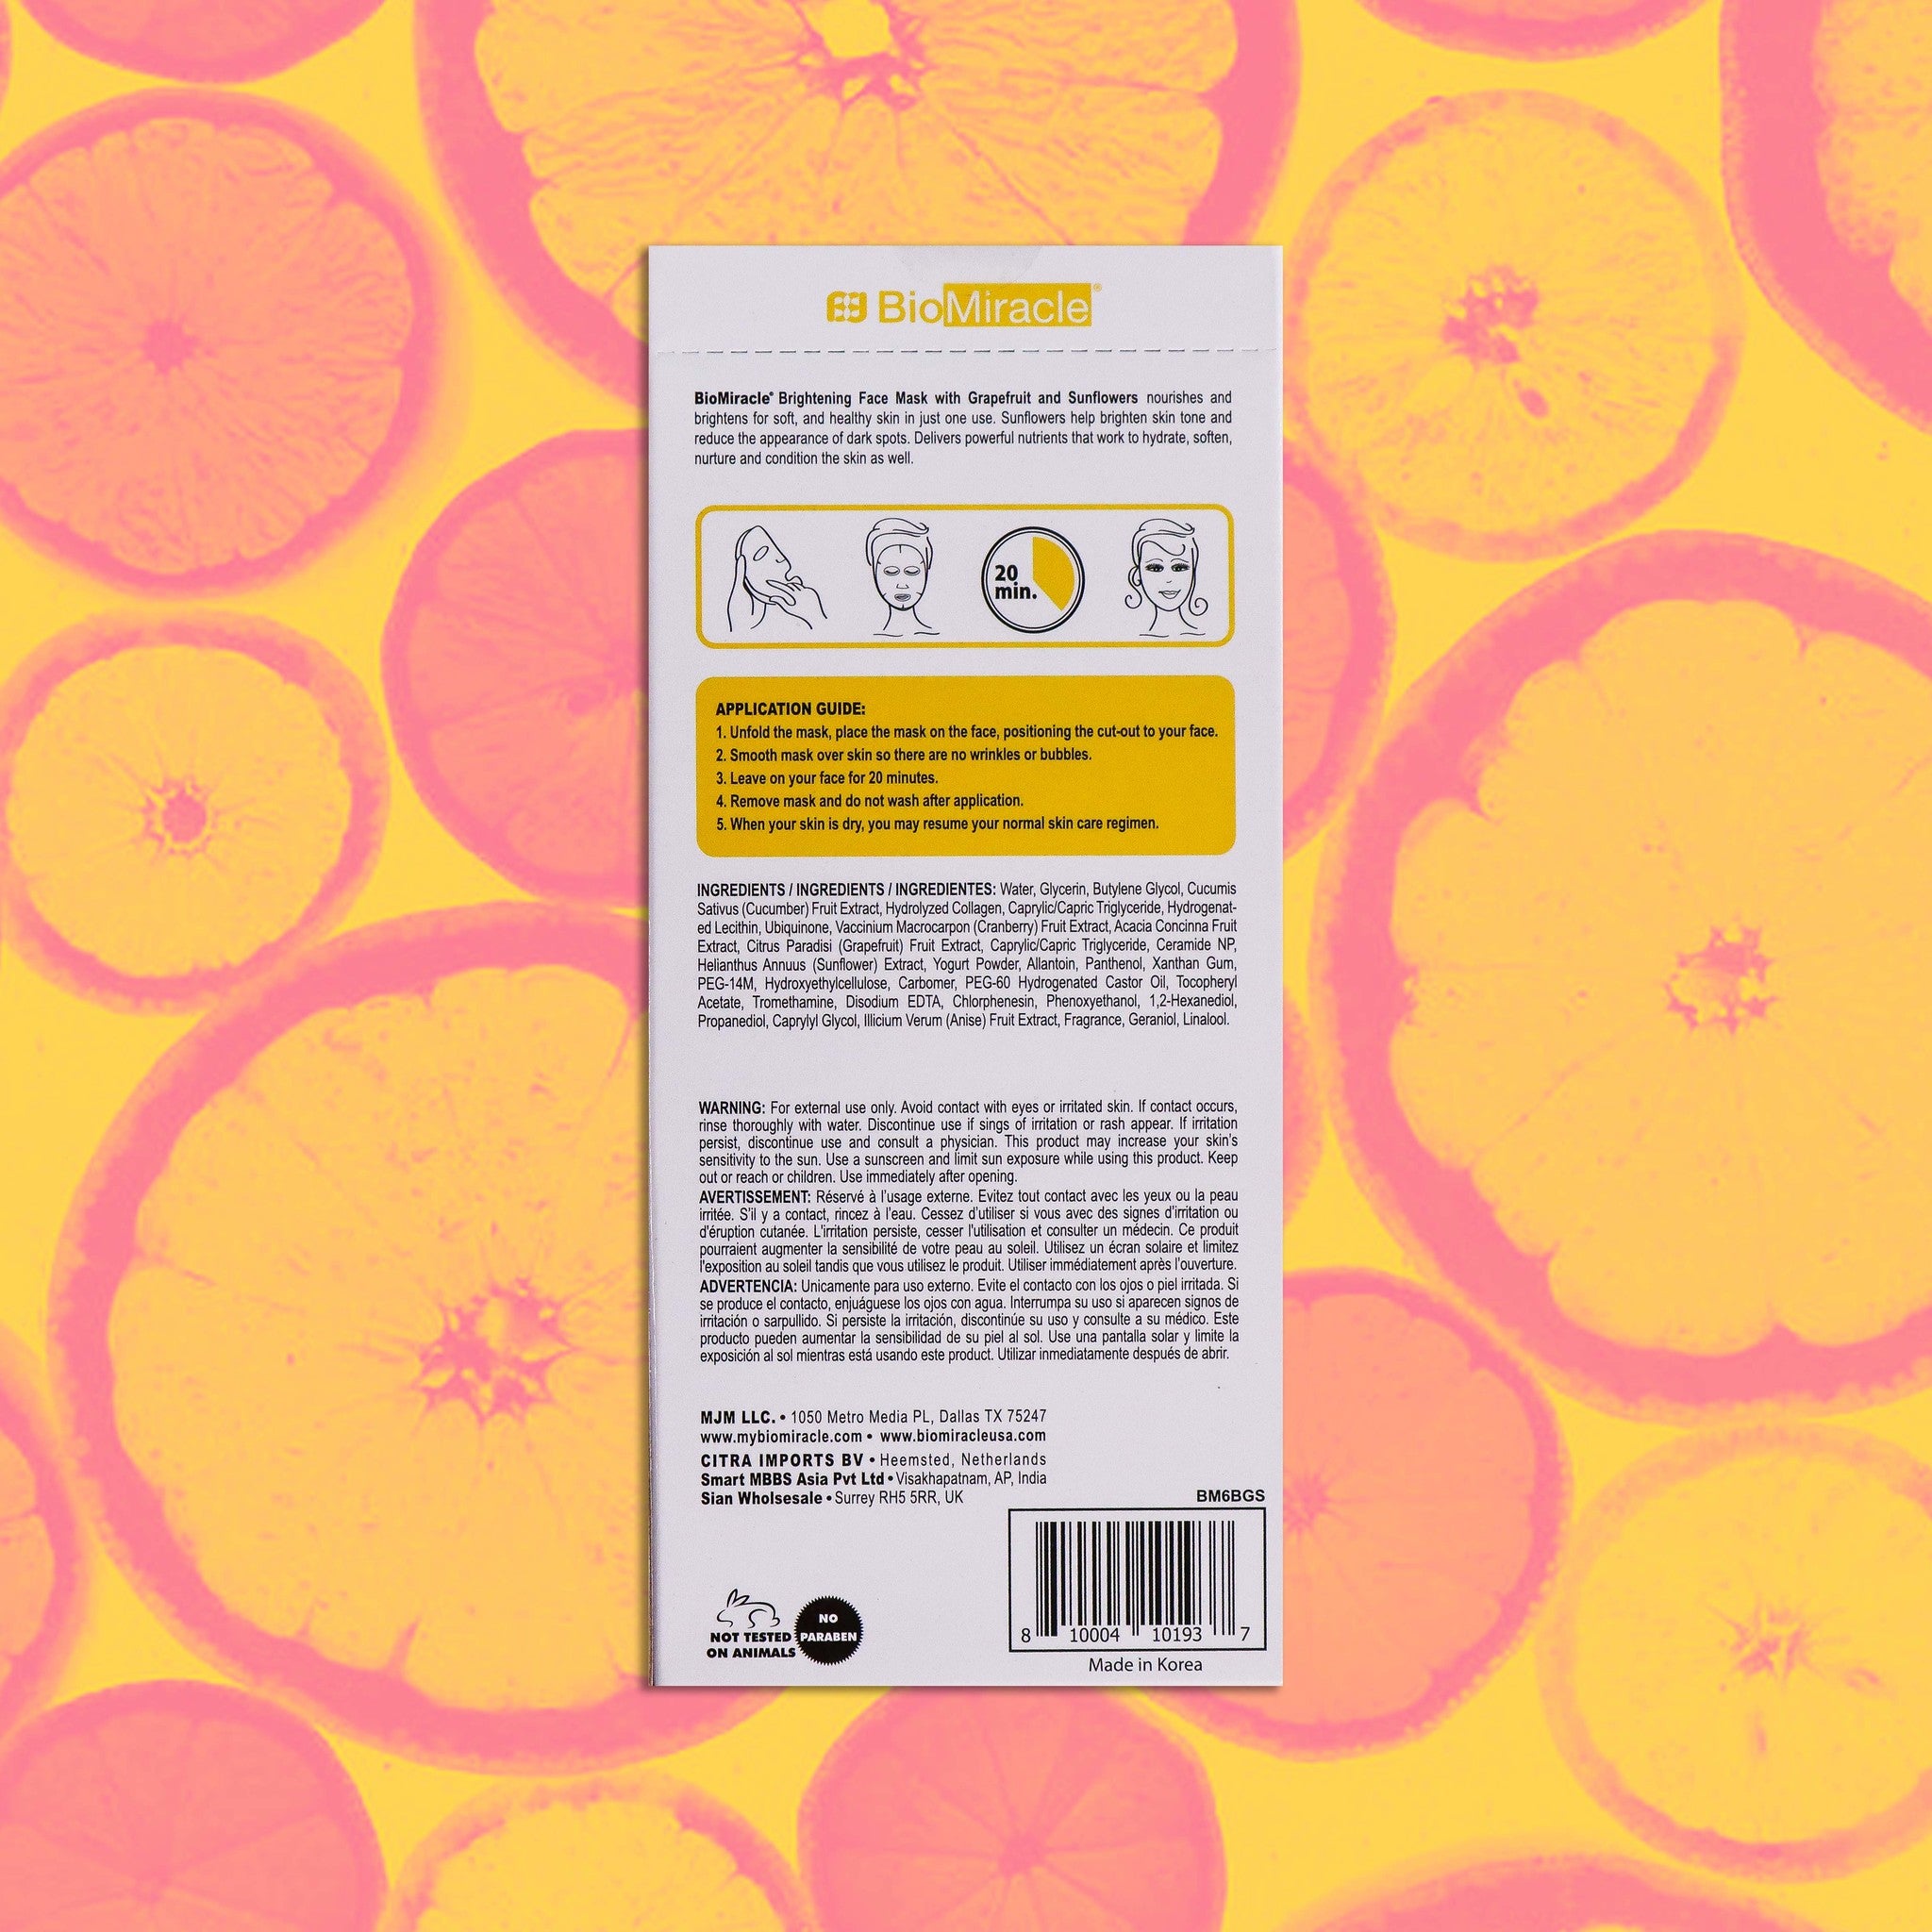 Simply Brightening Face Mask with Grapefruit &amp; Sunflower 5 Pack